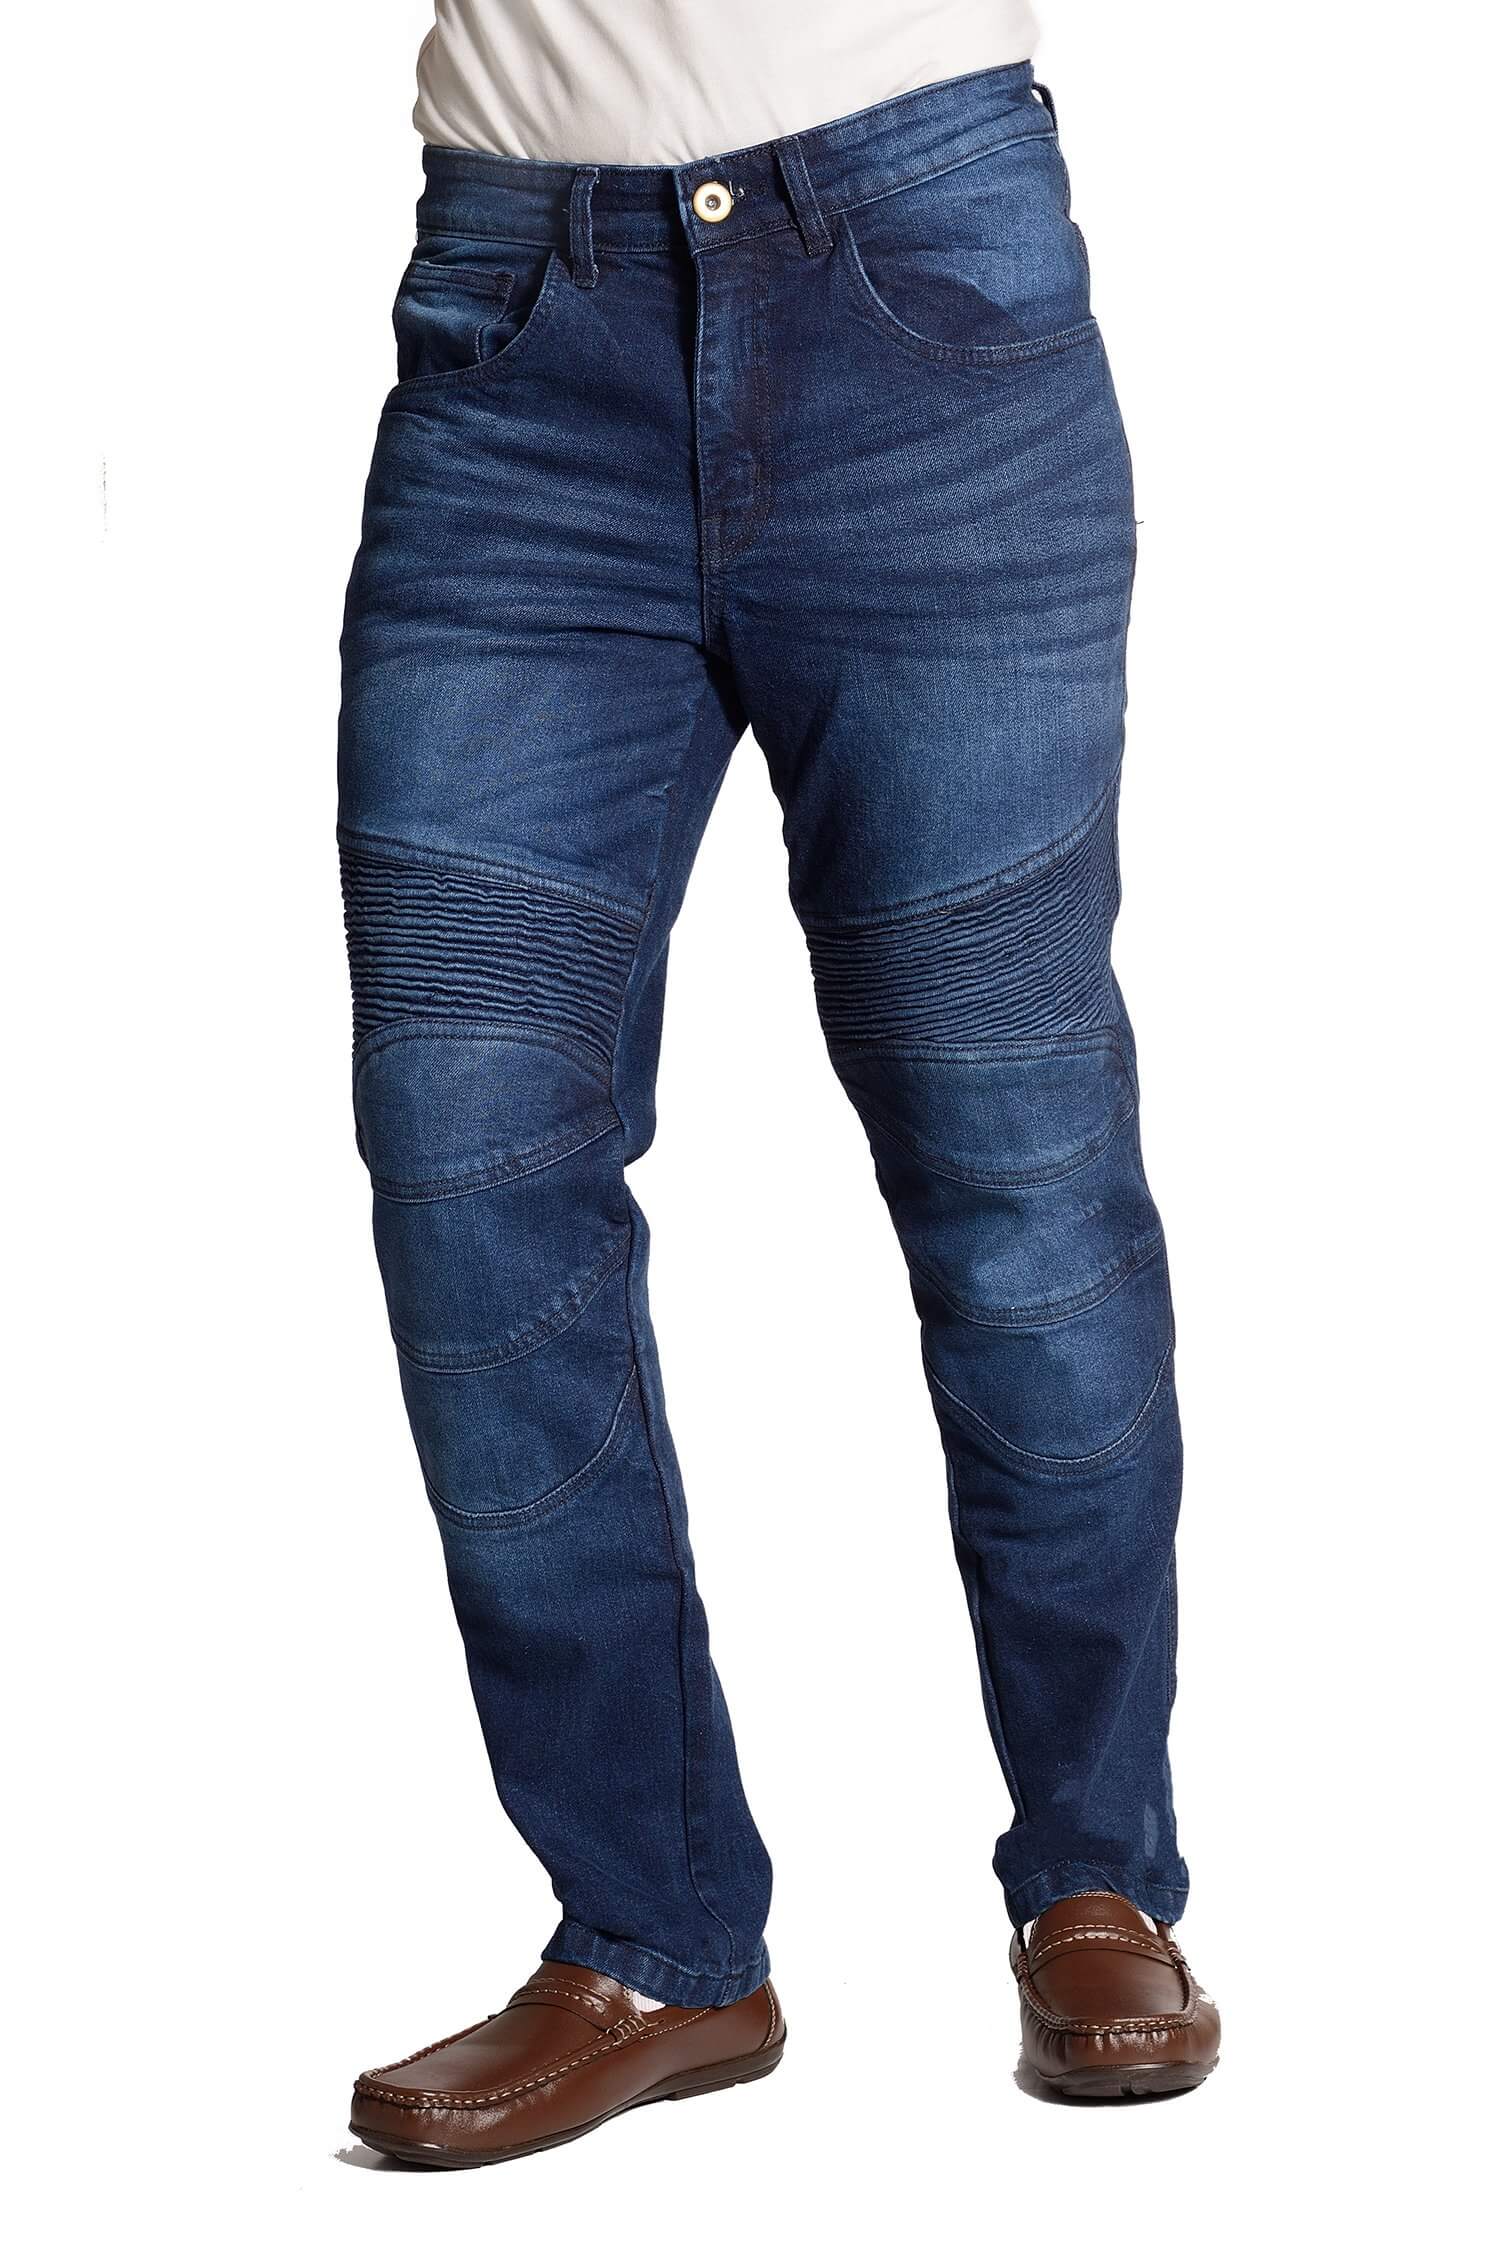 stretch-motorcycle-jeans-pants-11